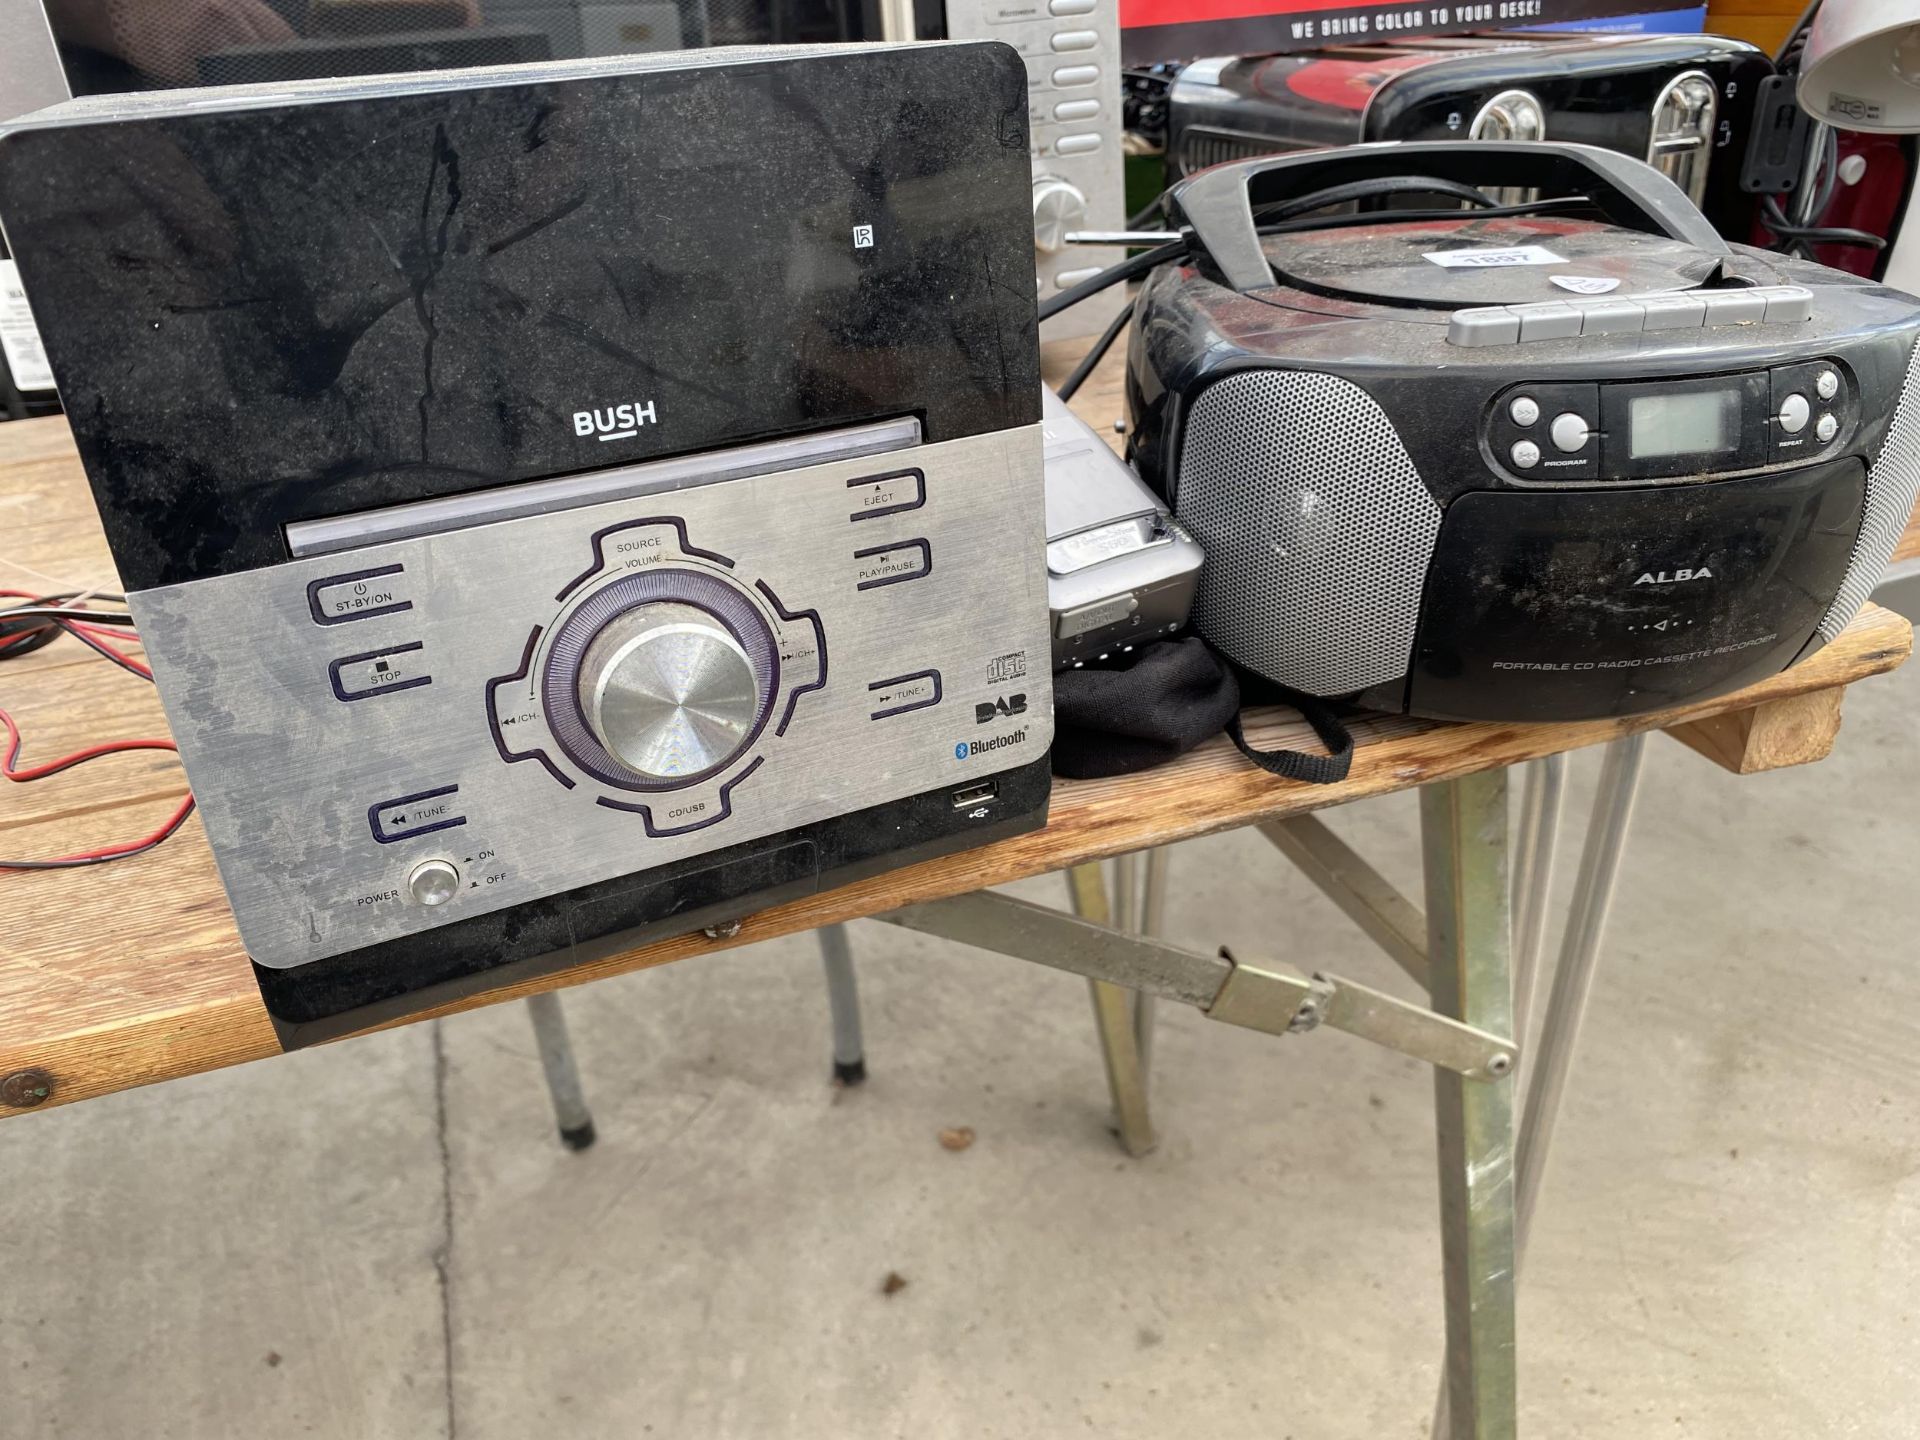 AN ALBA CD PLAYER AND A BUSH STEREO - Image 2 of 3